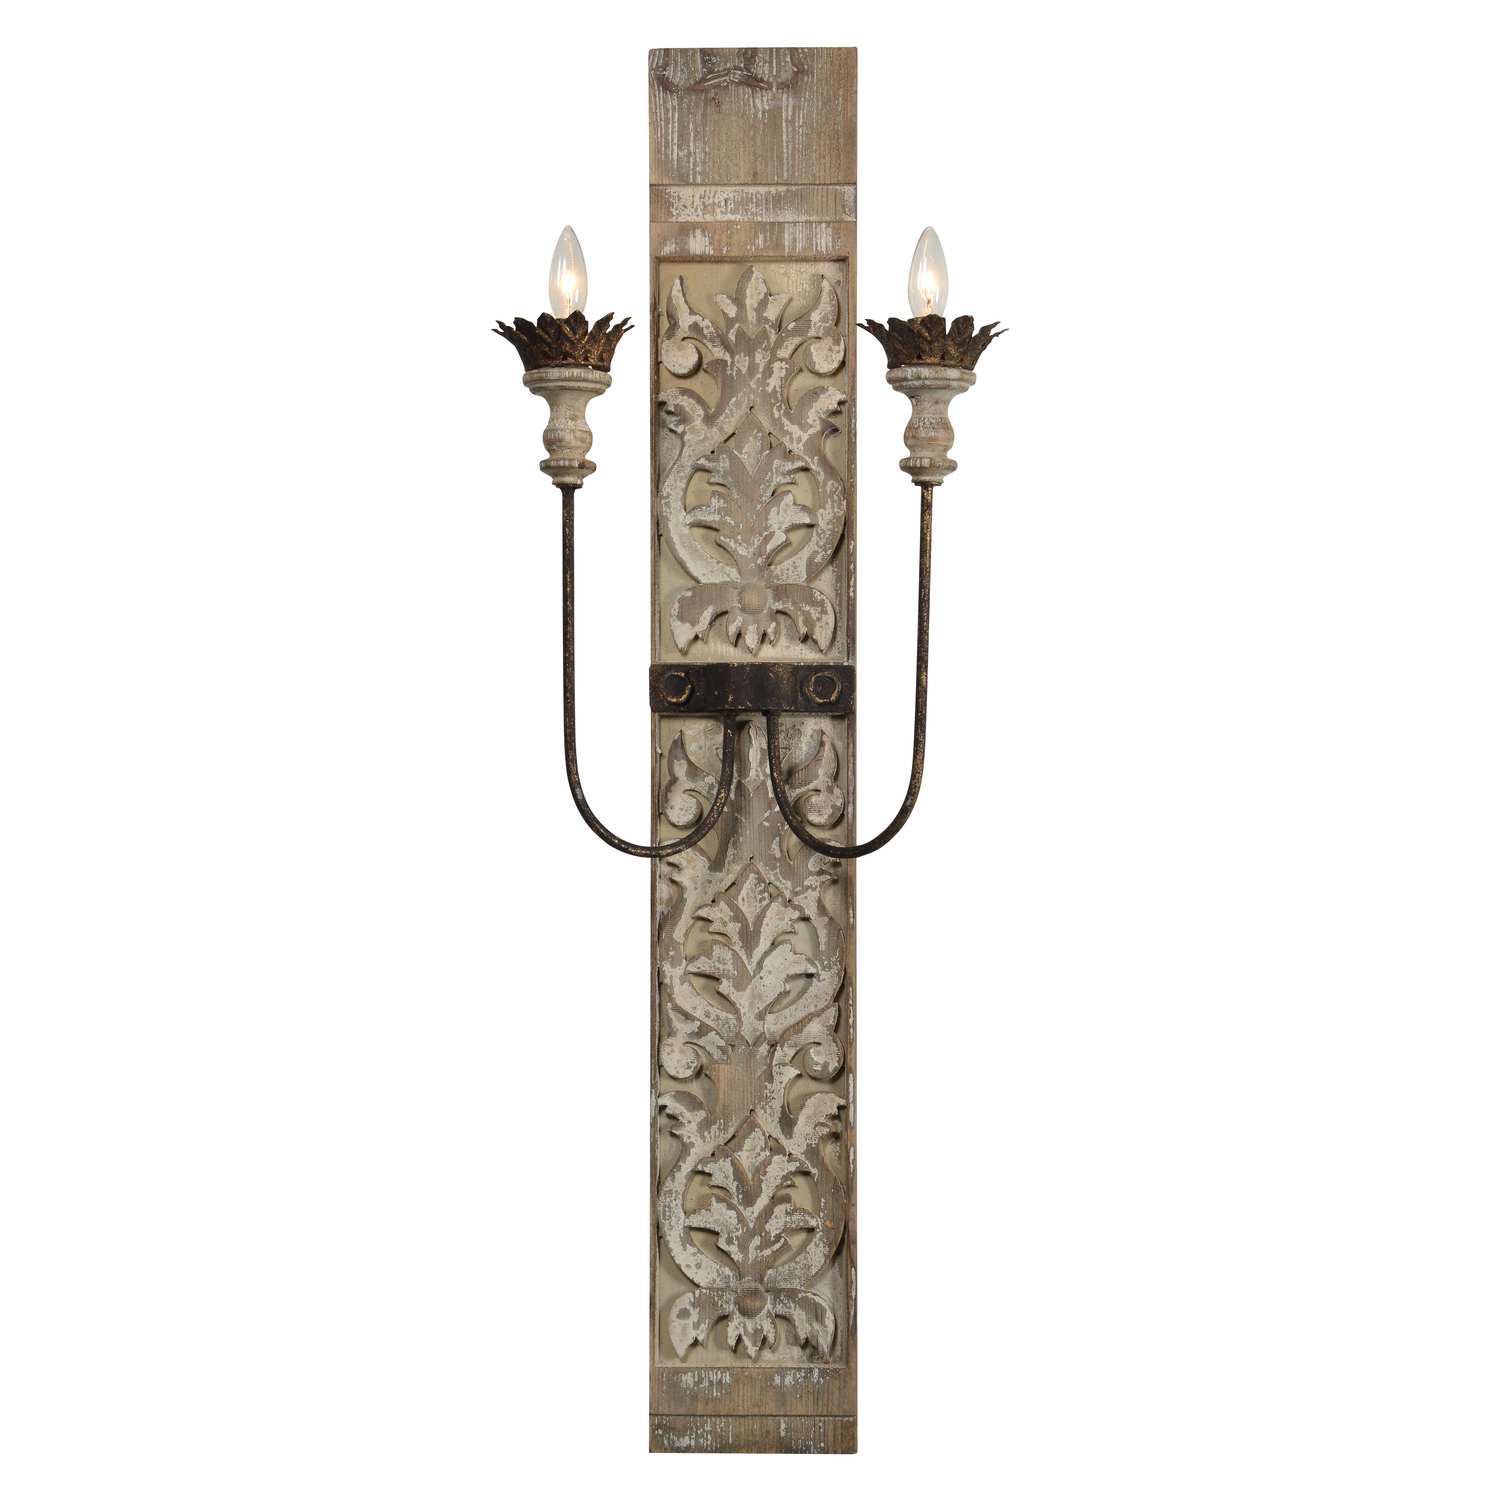 Wall Sconces Category